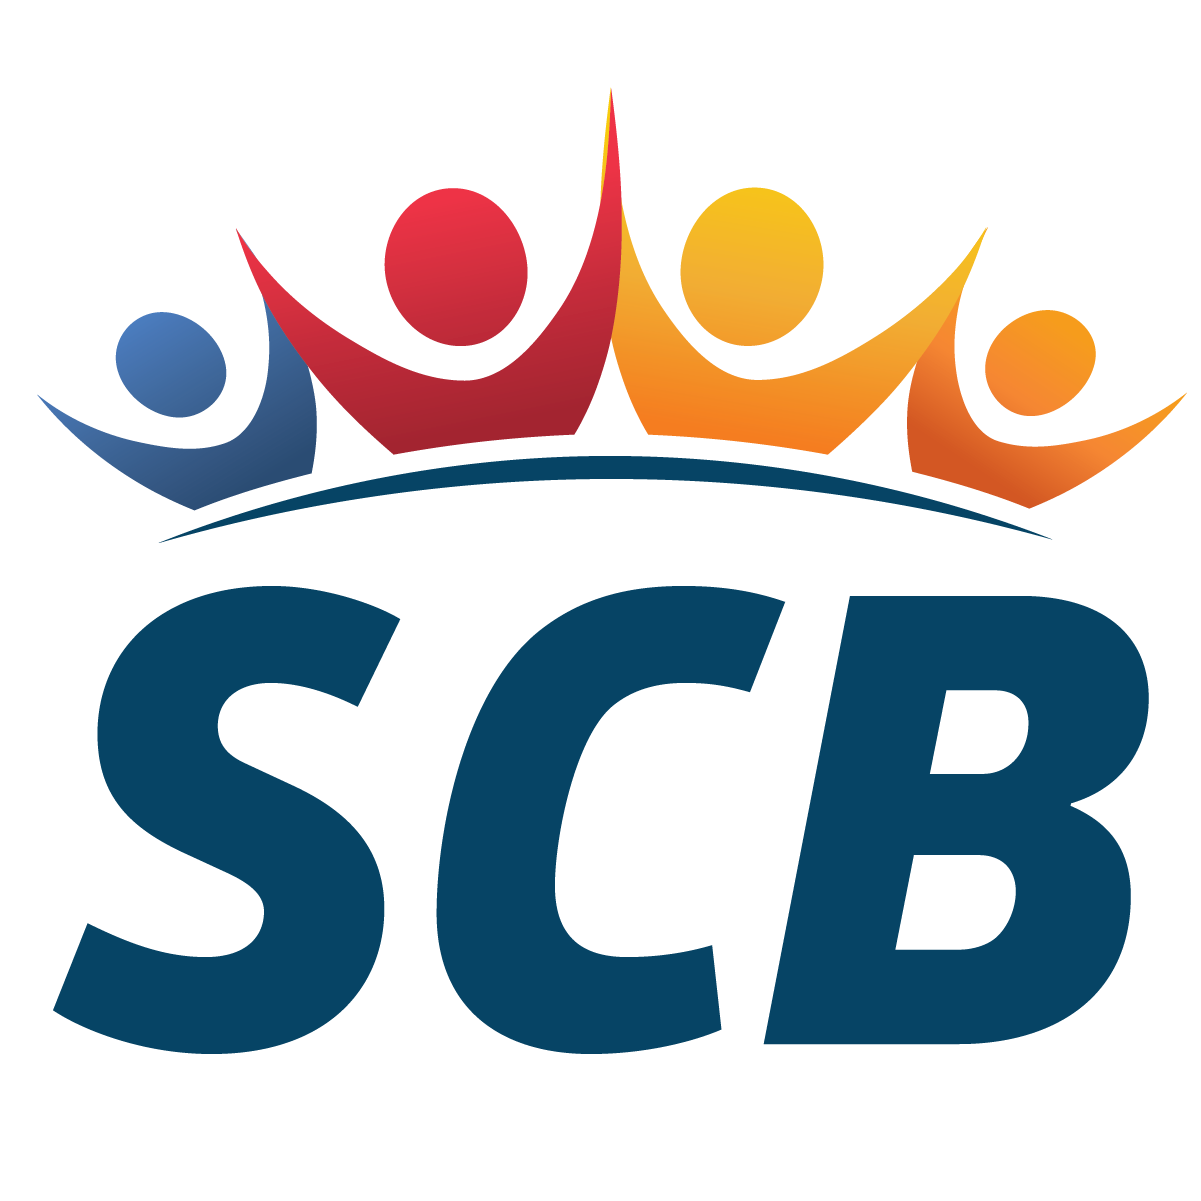 South Coast Business logo: letters, SCB, with multicolored peiple images above letters